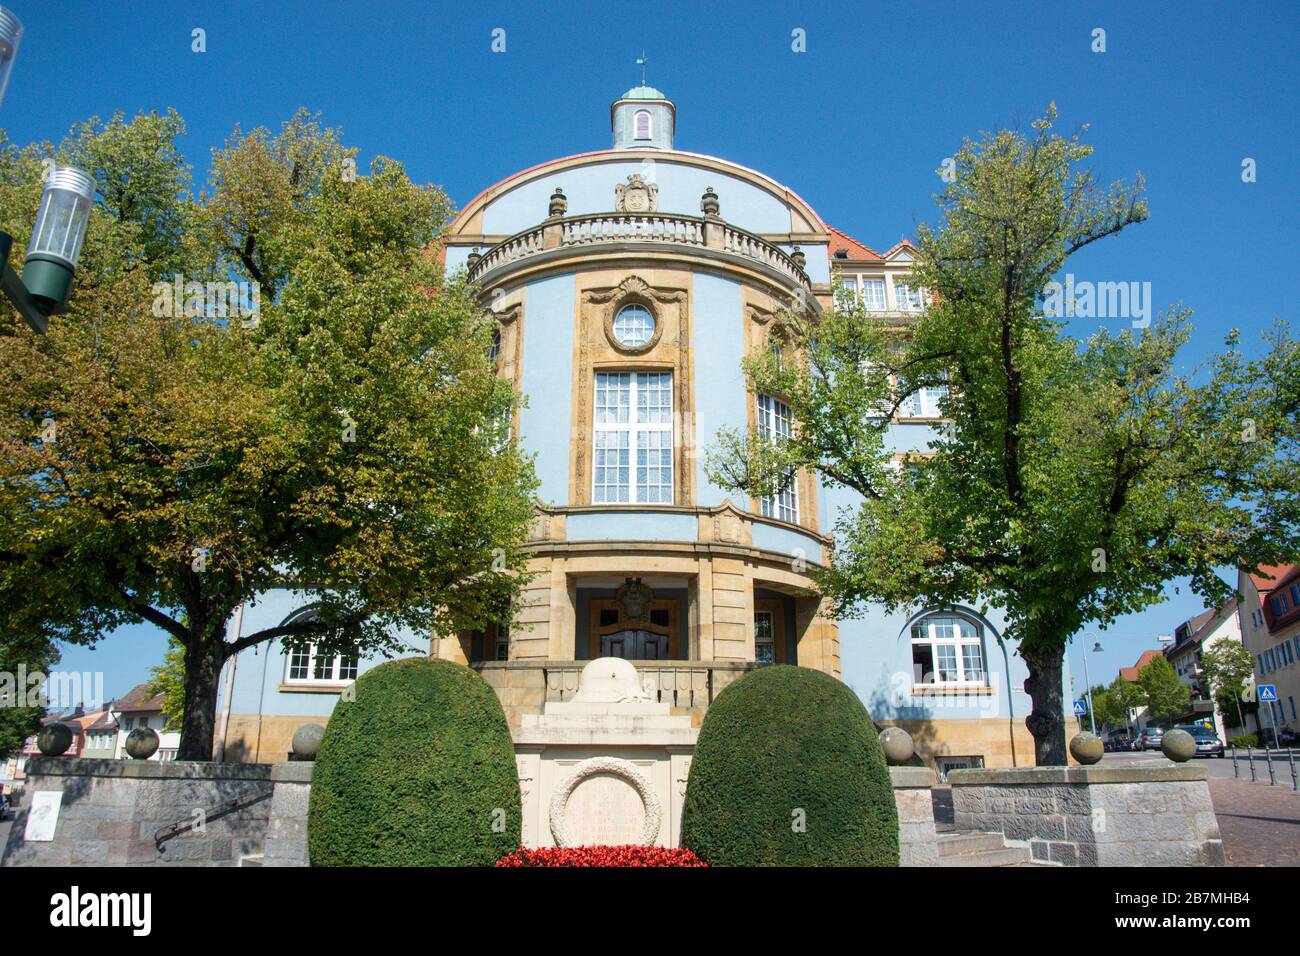 Blue city hall in Donaueschingen in the Blackforest / Germany Stock Photo